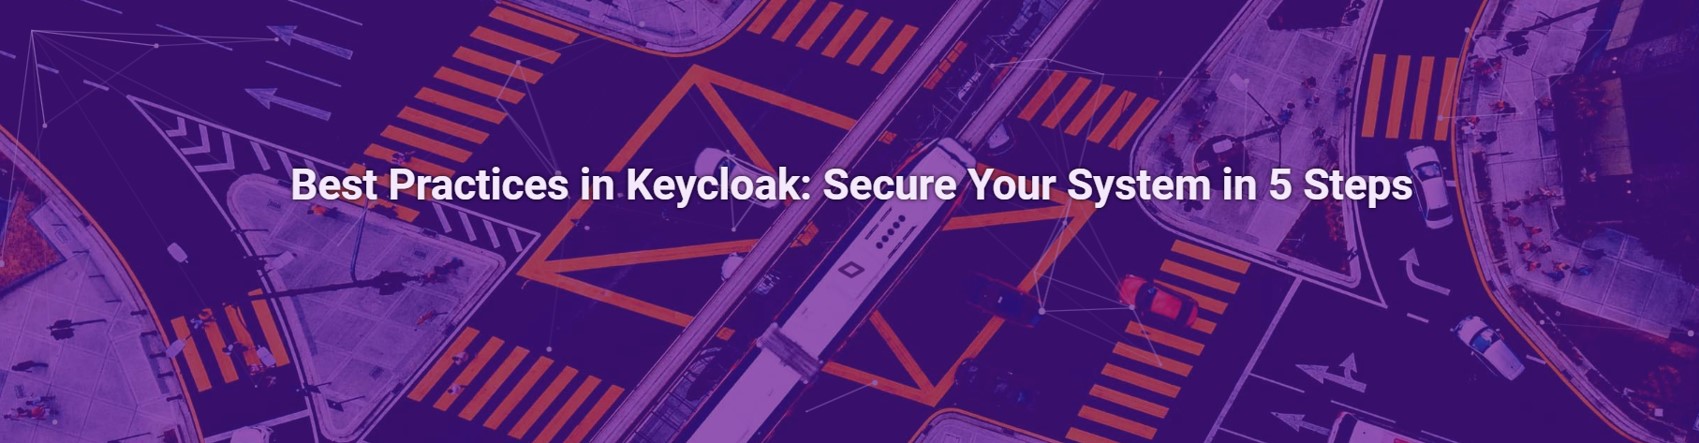 Best Practices in Keycloak: Secure Your System in 5 Steps